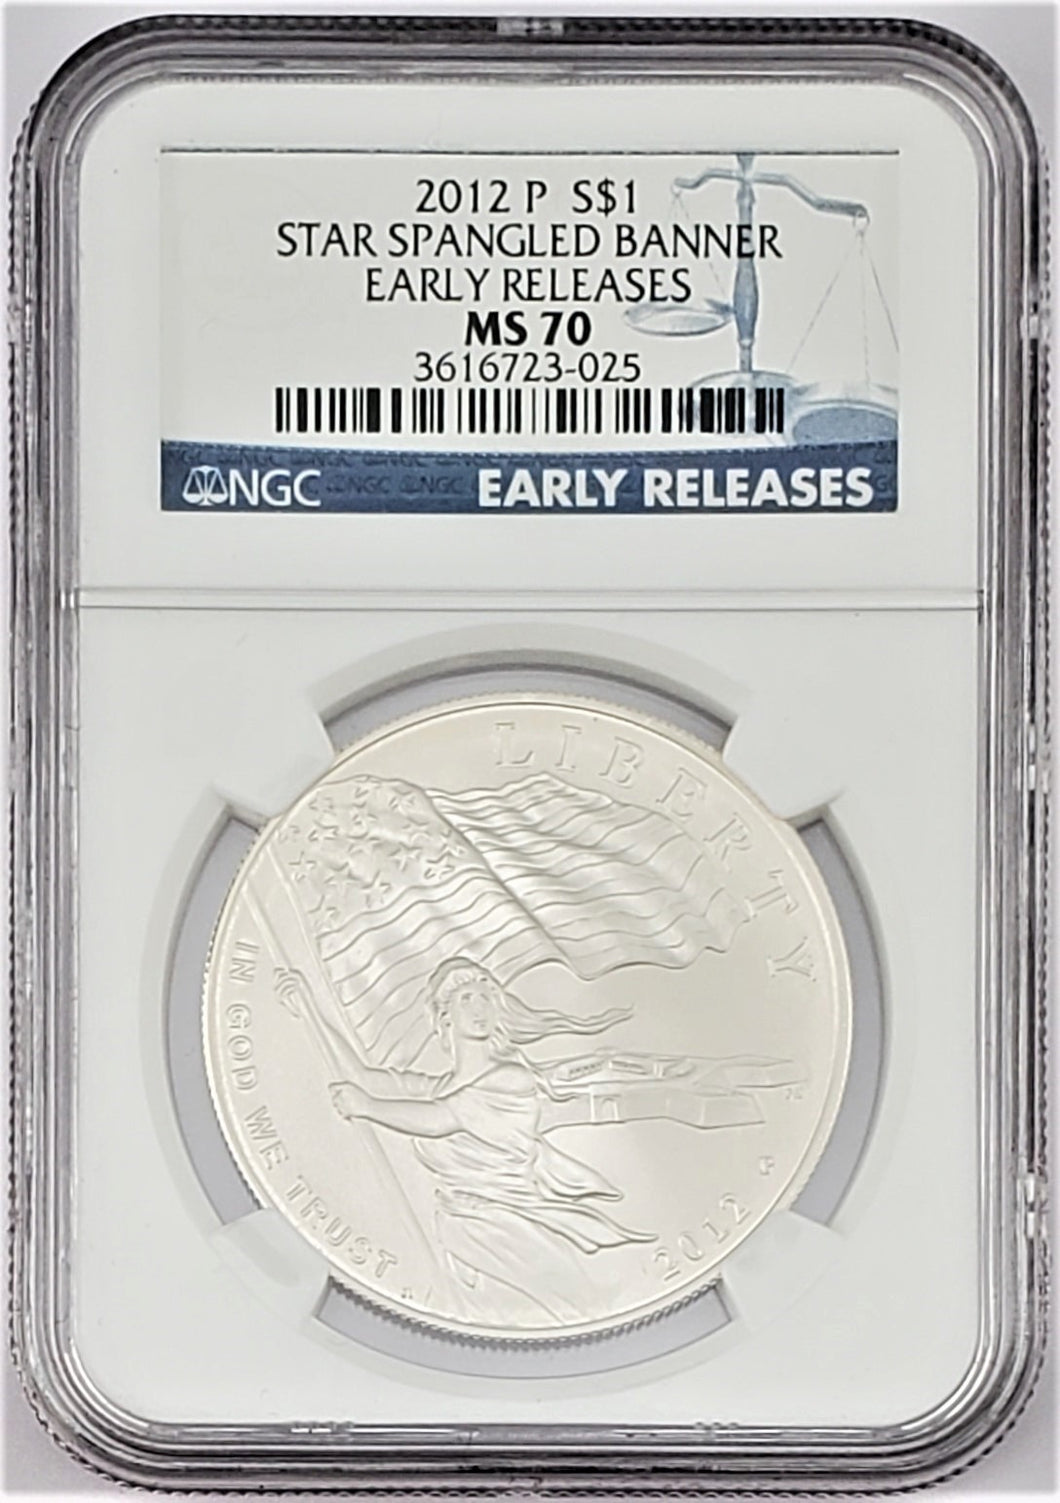 2012 P Star Spangled Banner Commemorative Silver Dollar Early Releases NGC MS 70